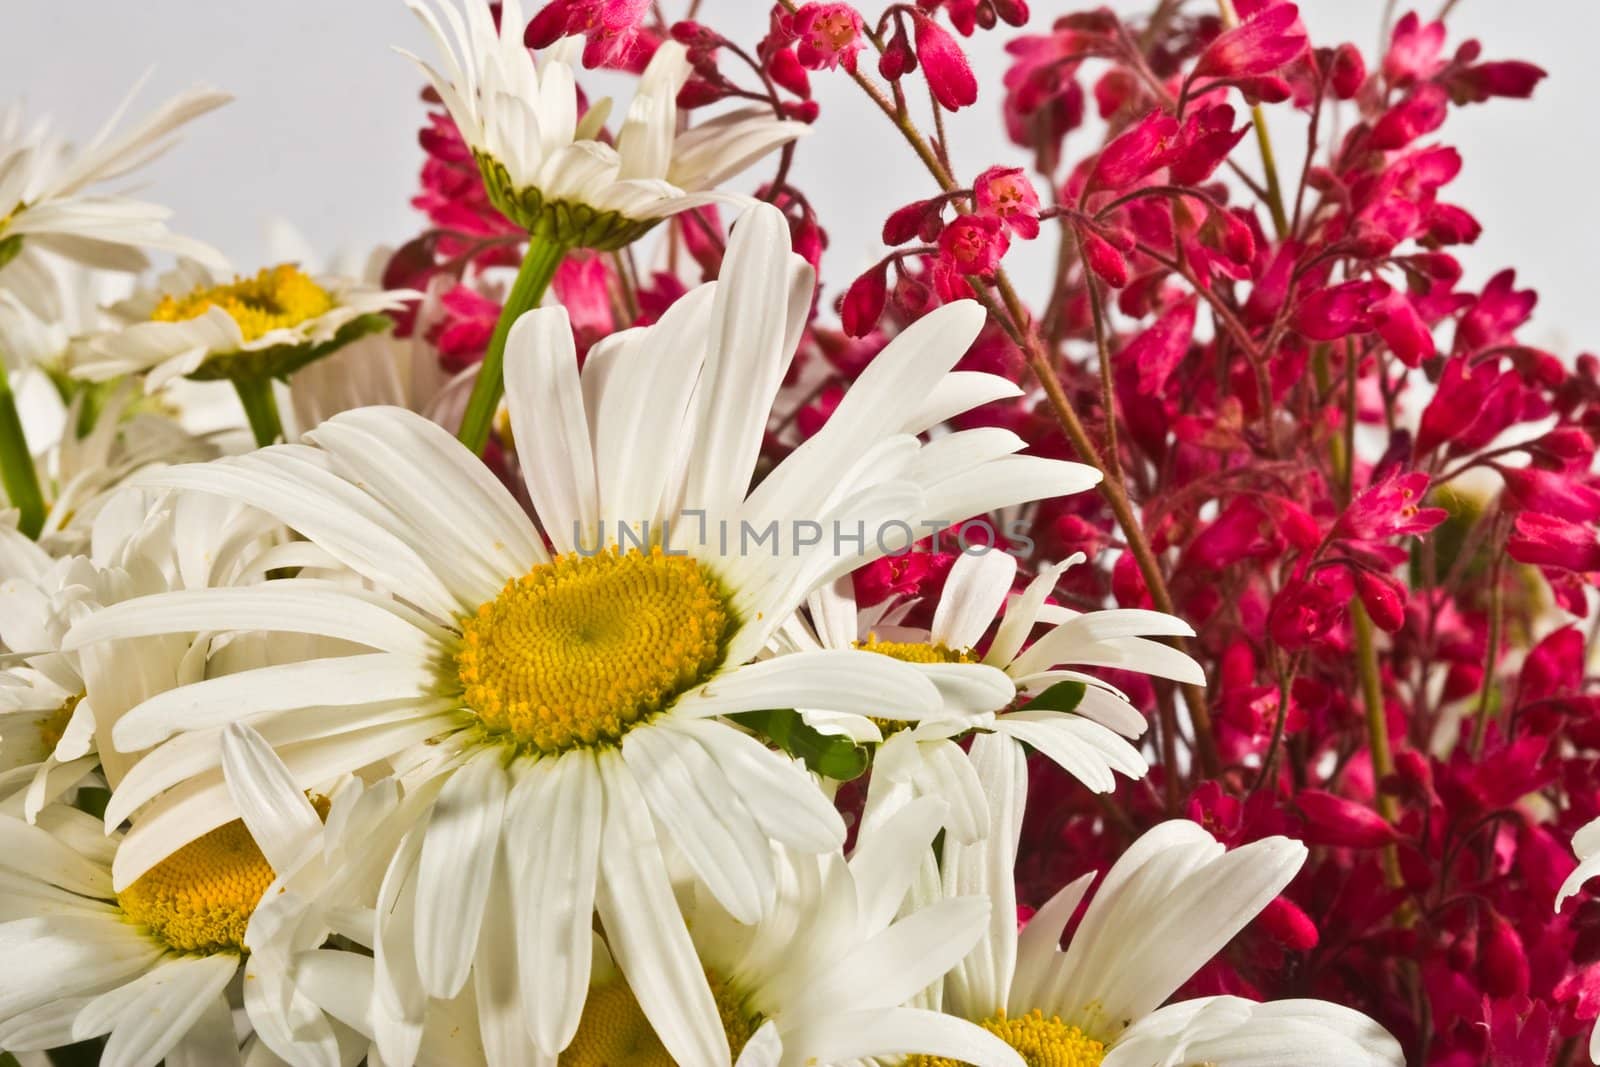 flower series: white camomile bouquet with small pink flower